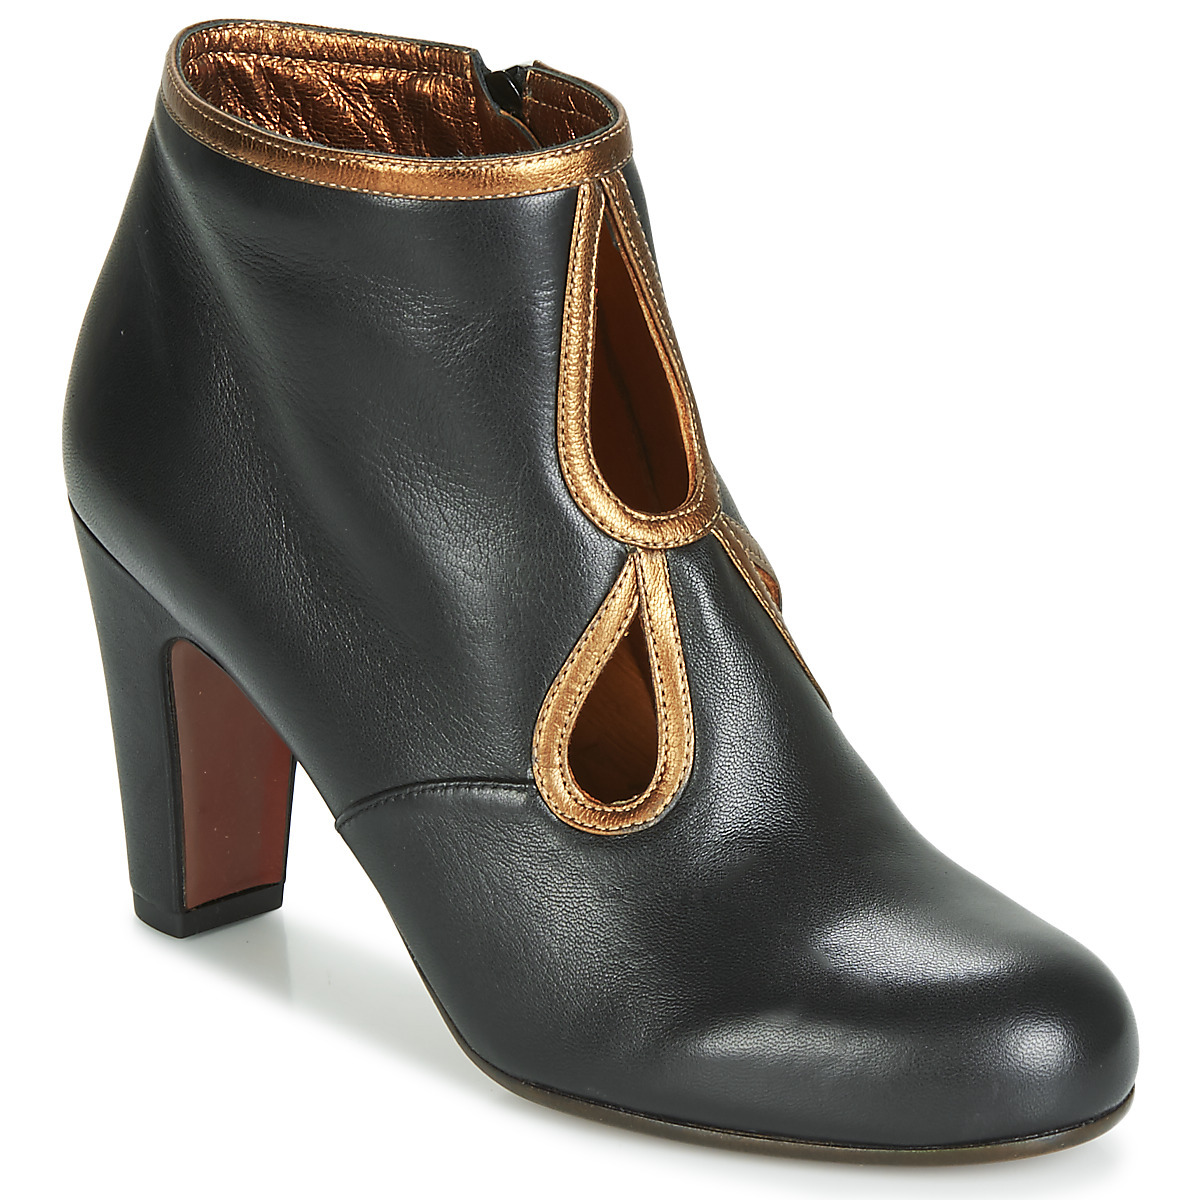 Spartoo - Ankle Boots Black Chie Mihara GOOFASH